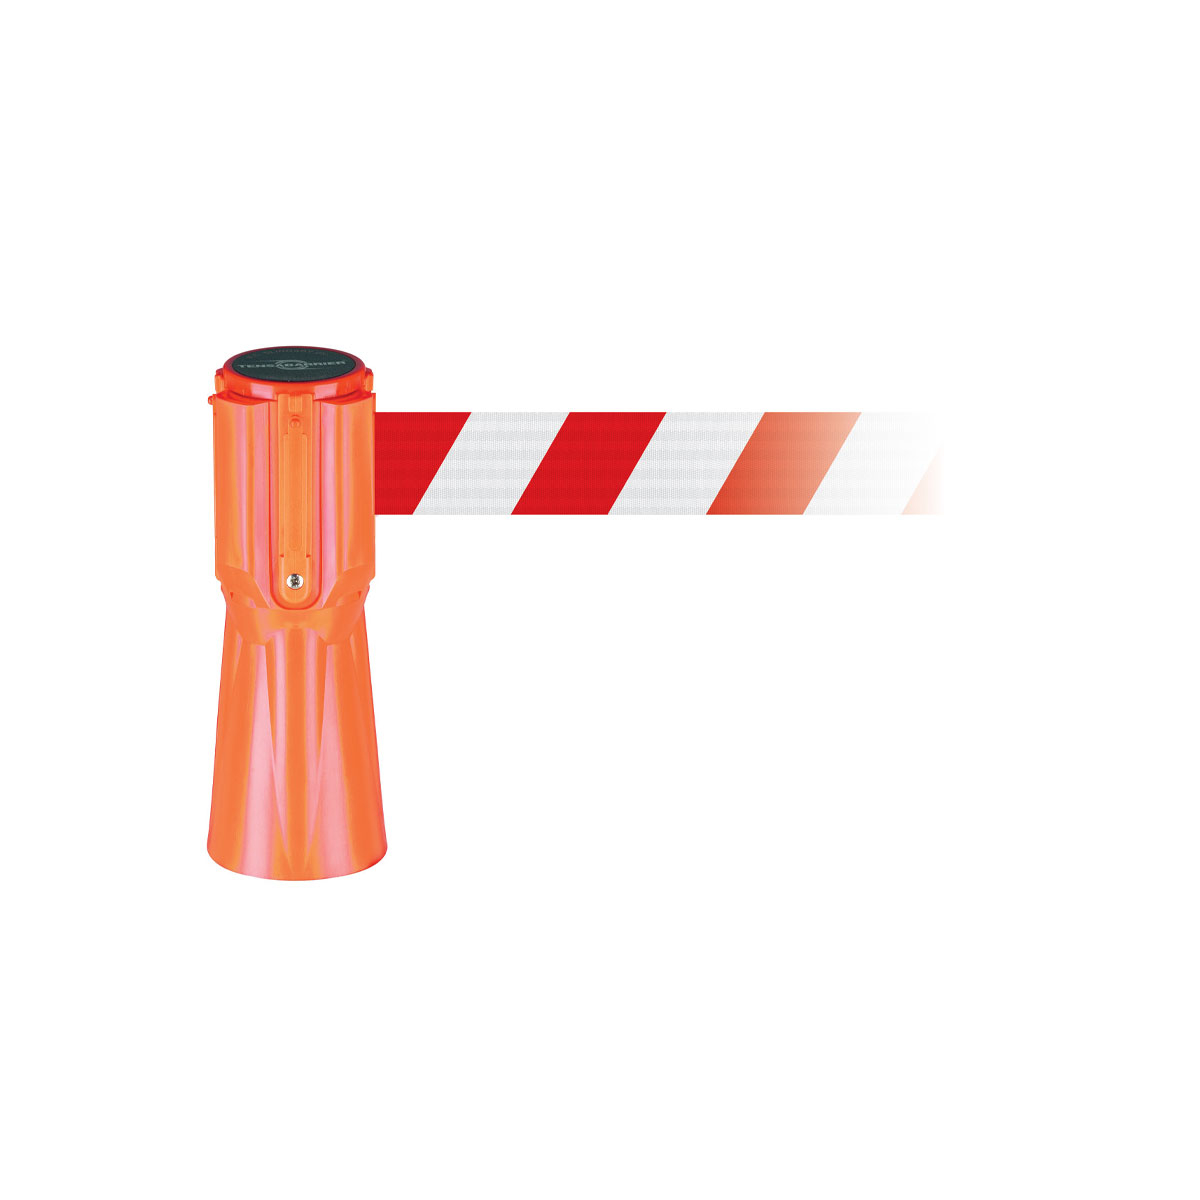 Tensa Traffic Cone Topper Safety Barrier Fits Most Industry Standard Roadside Traffic Cones